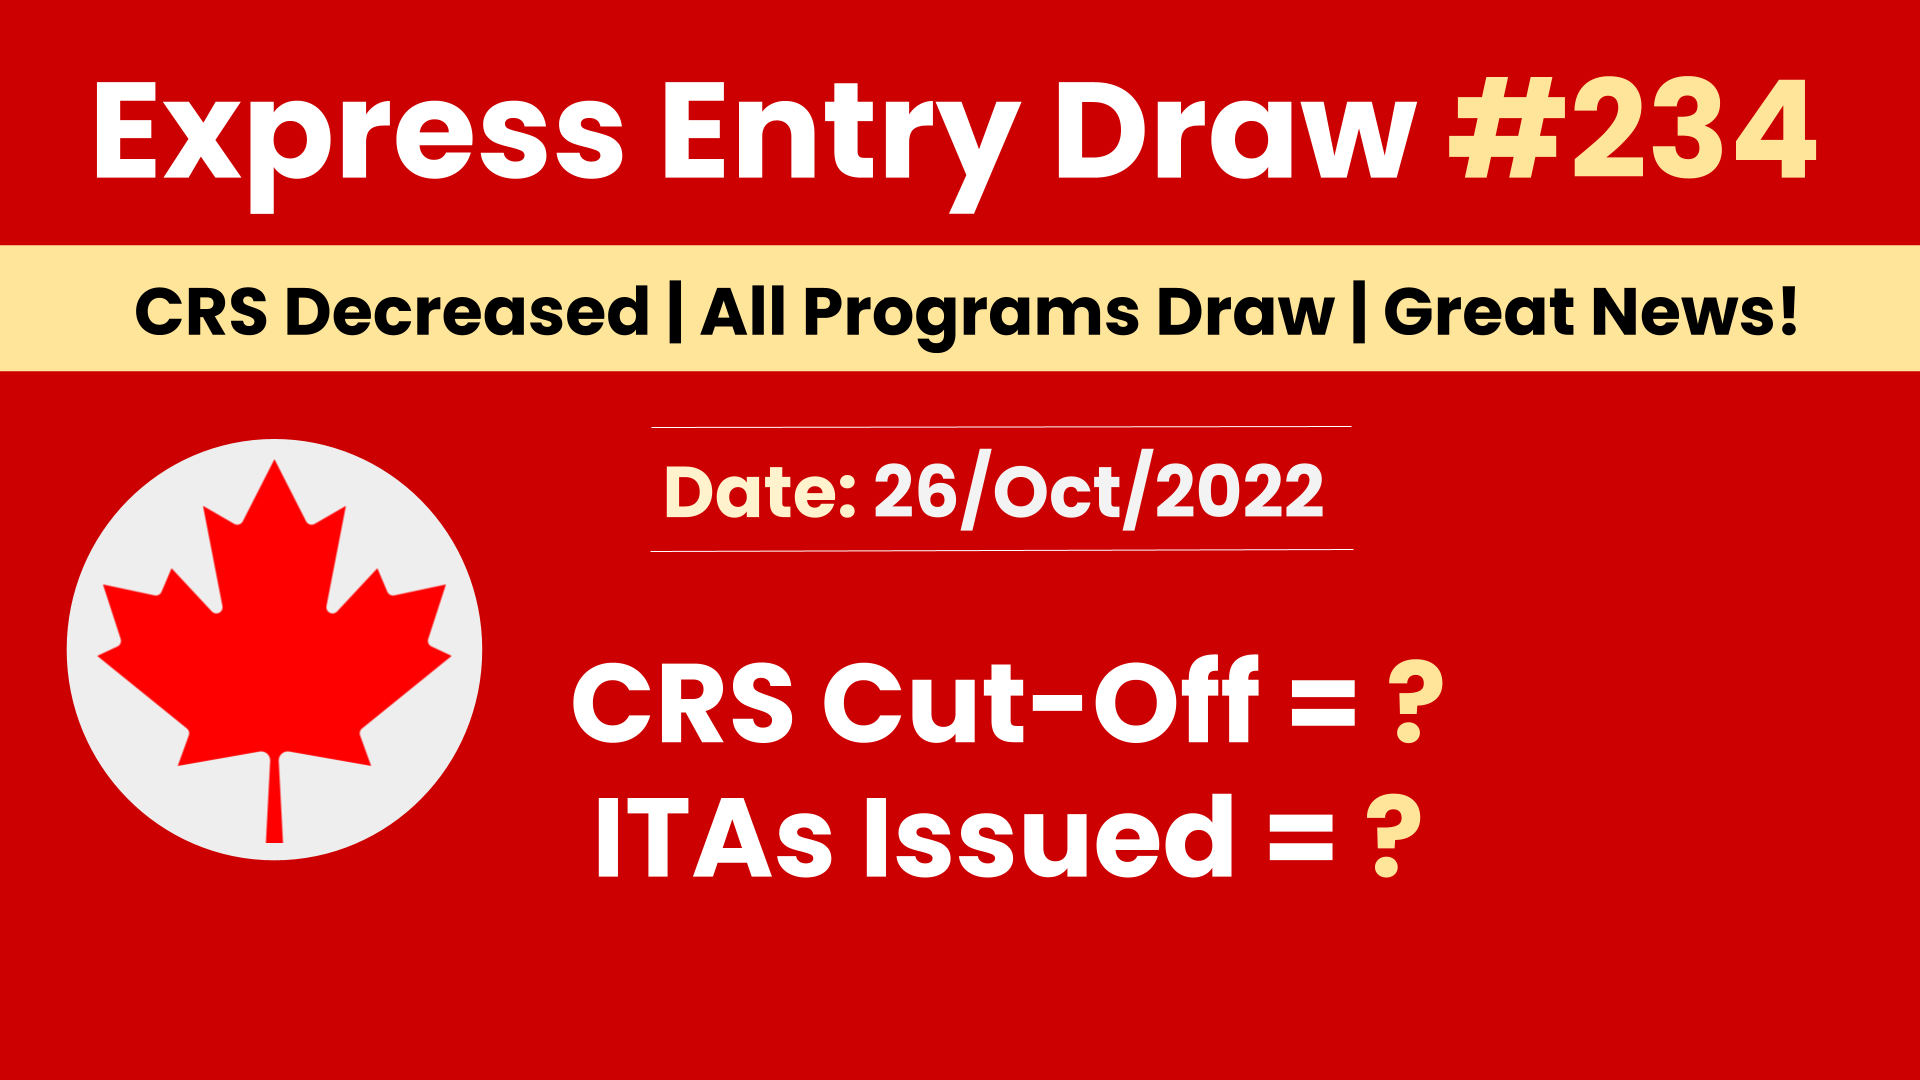 CRS minimum score drops to 441 in new Express Entry draw -